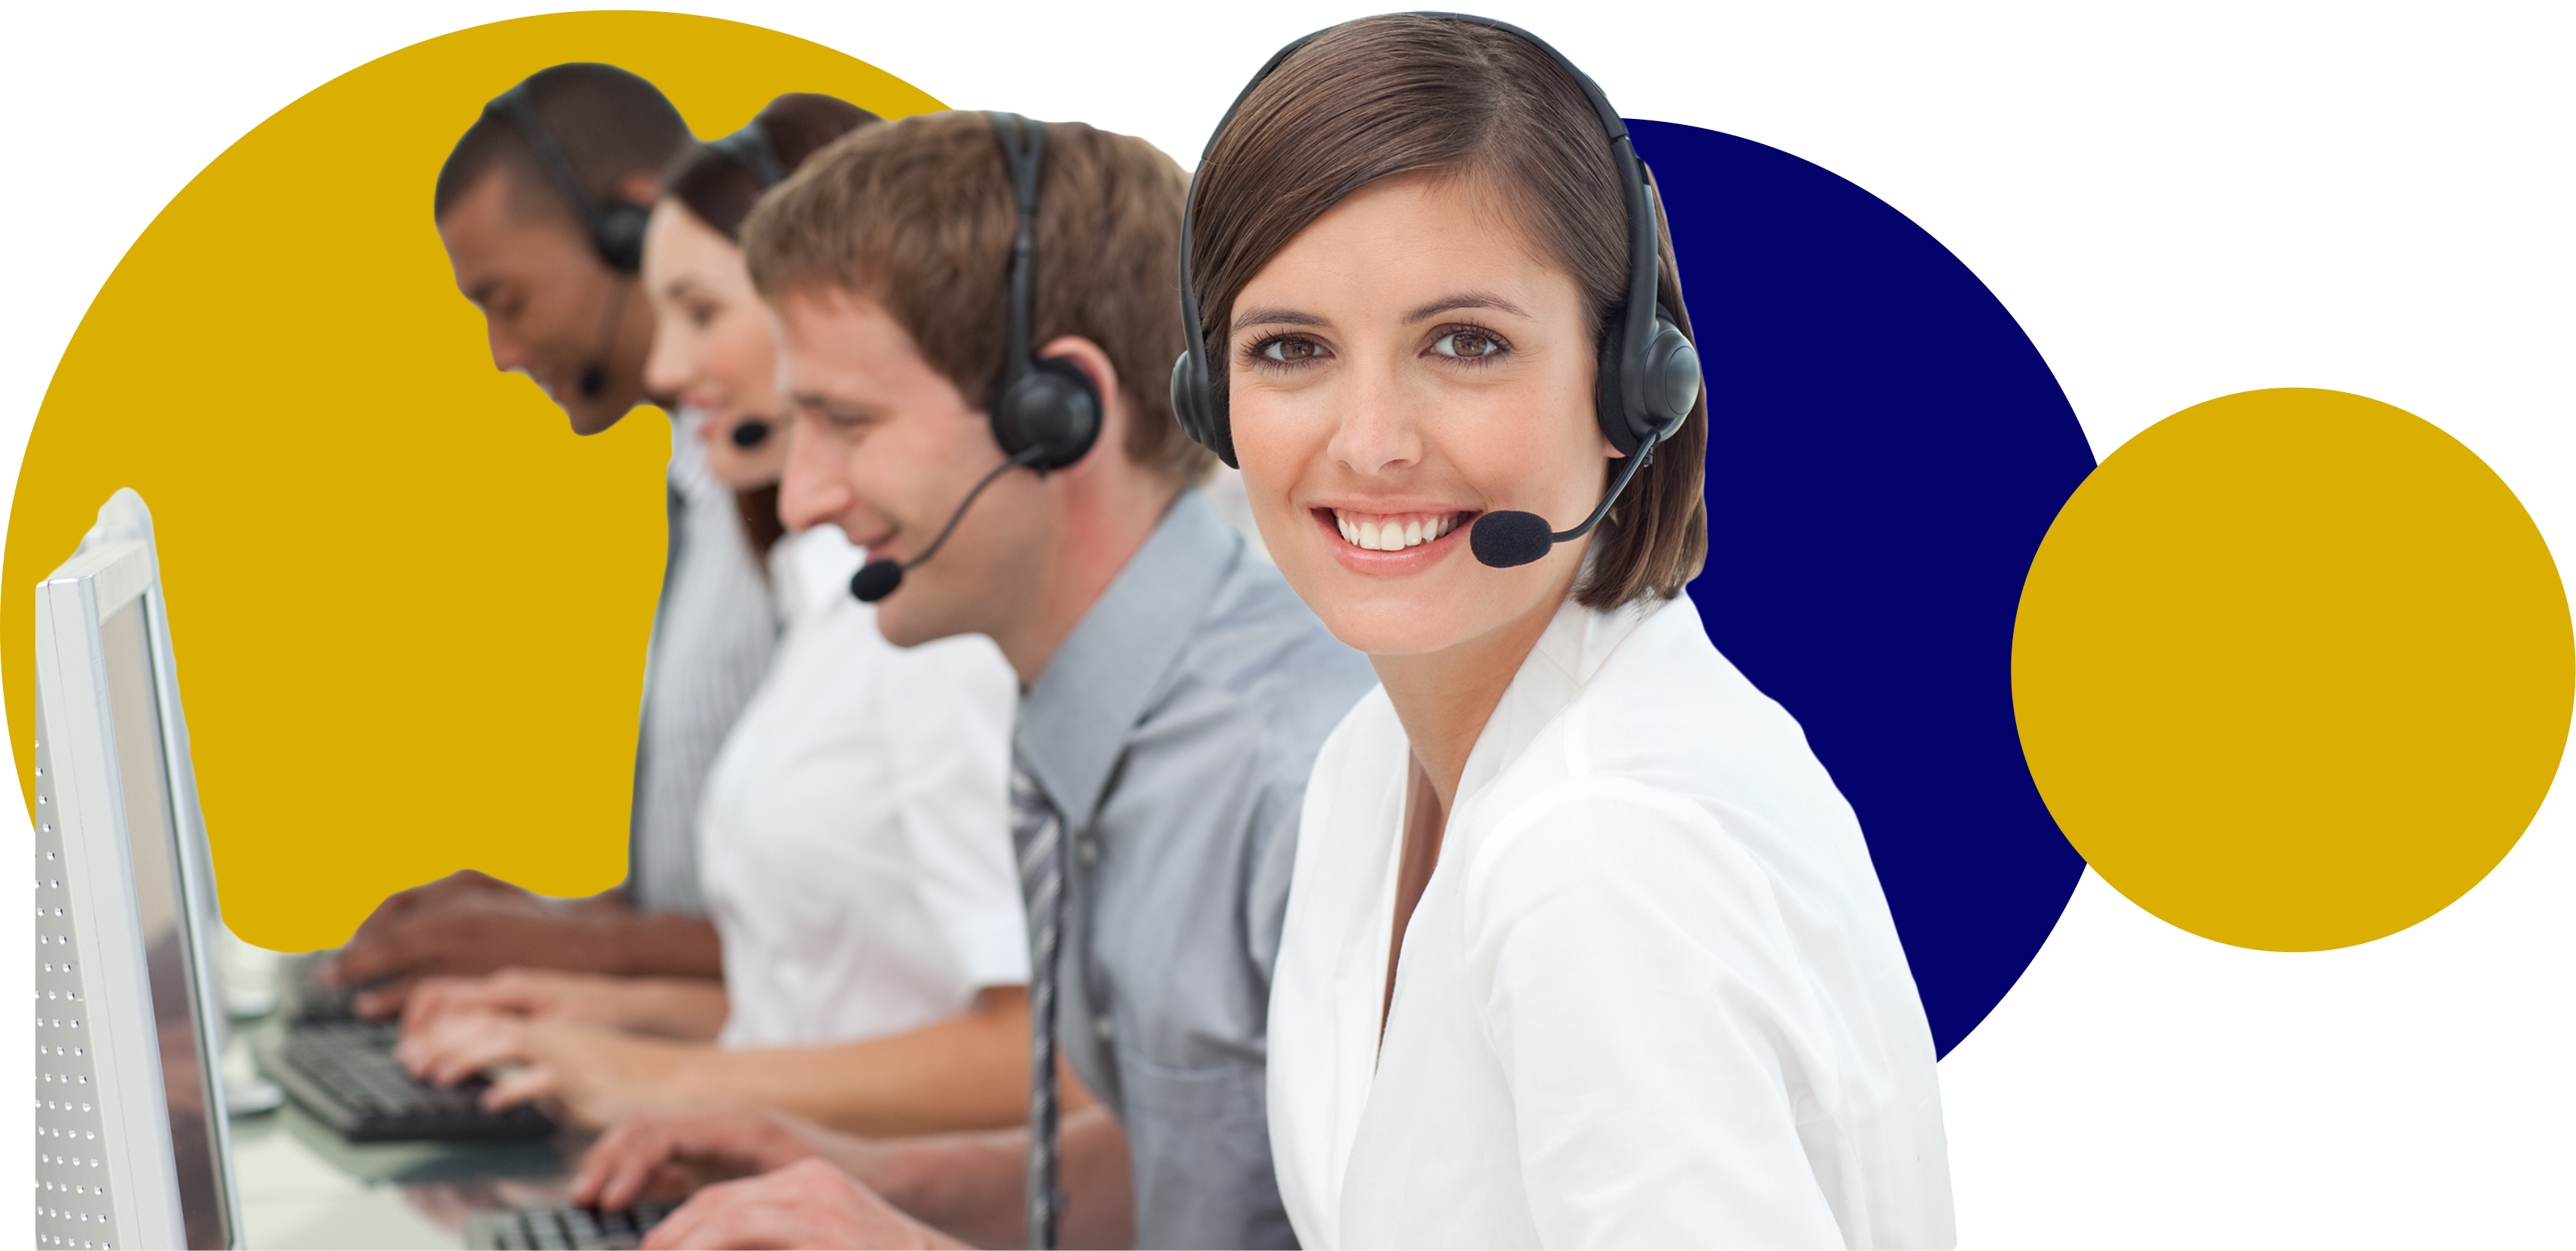 Business VoIP Solutions